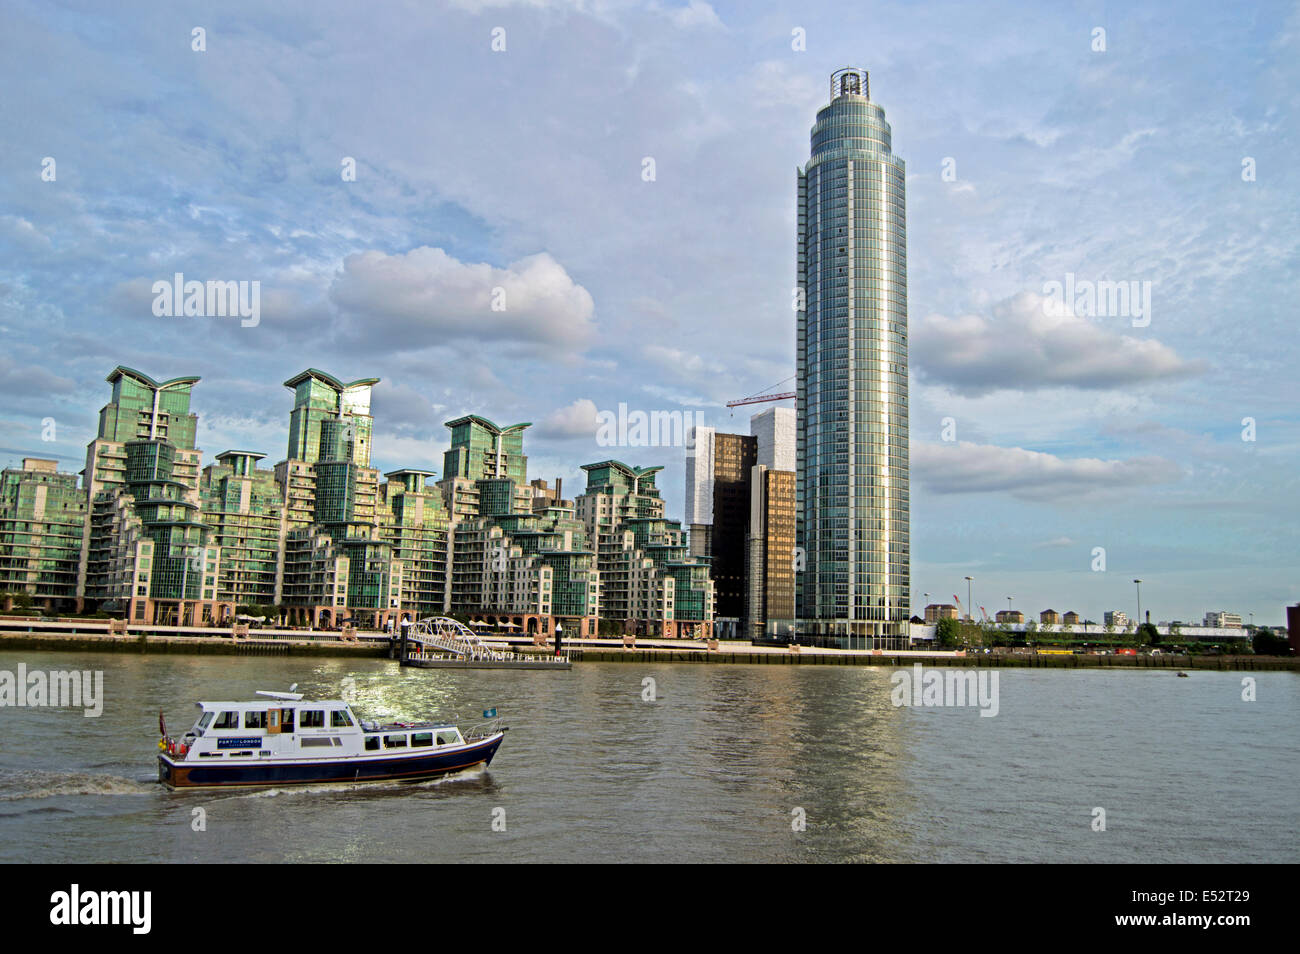 View of the St George Wharf development showing the St. George Wharf Tower, Vauxhall, London Borough of Lambeth, London, England Stock Photo